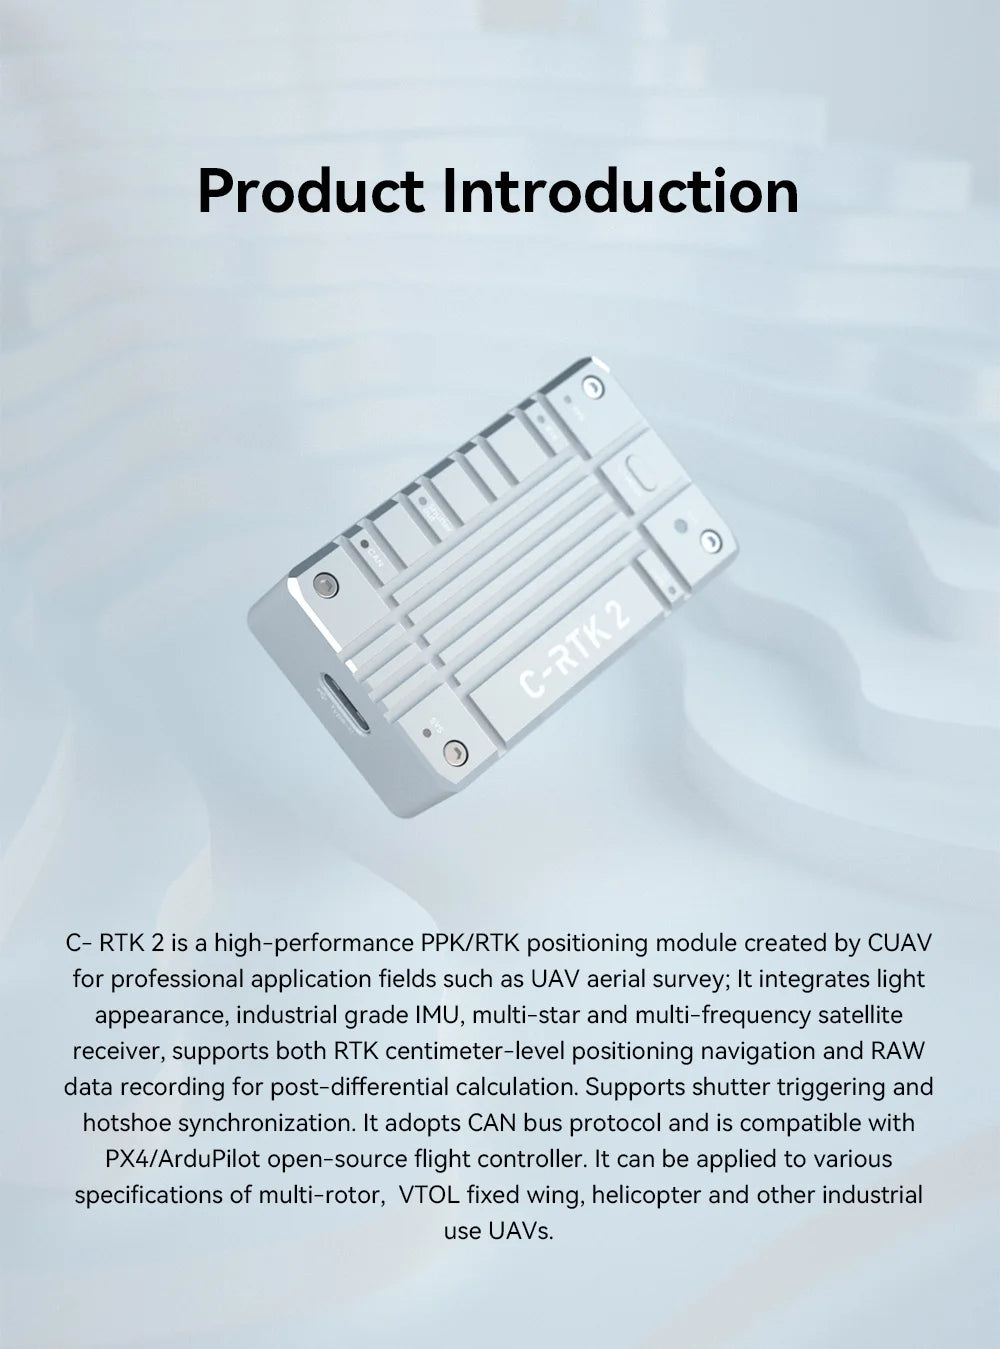 C- RTK 2 is a high-performance positioning module created by CUAV 